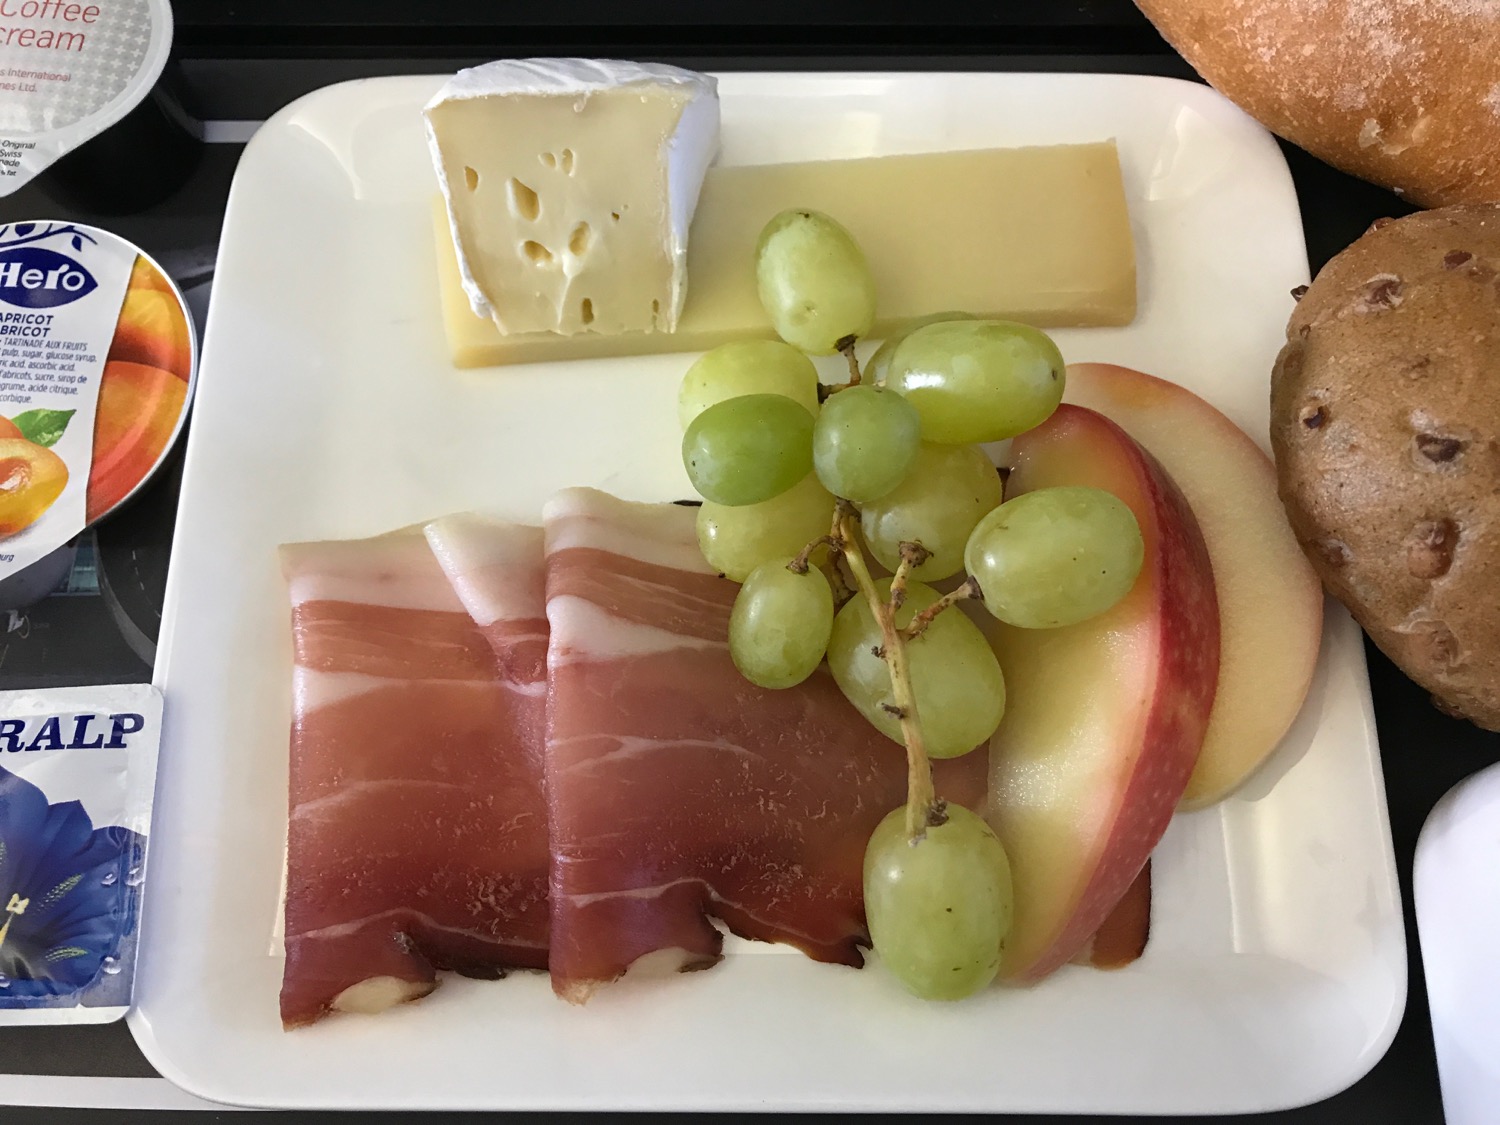 a plate of food with fruit and cheese